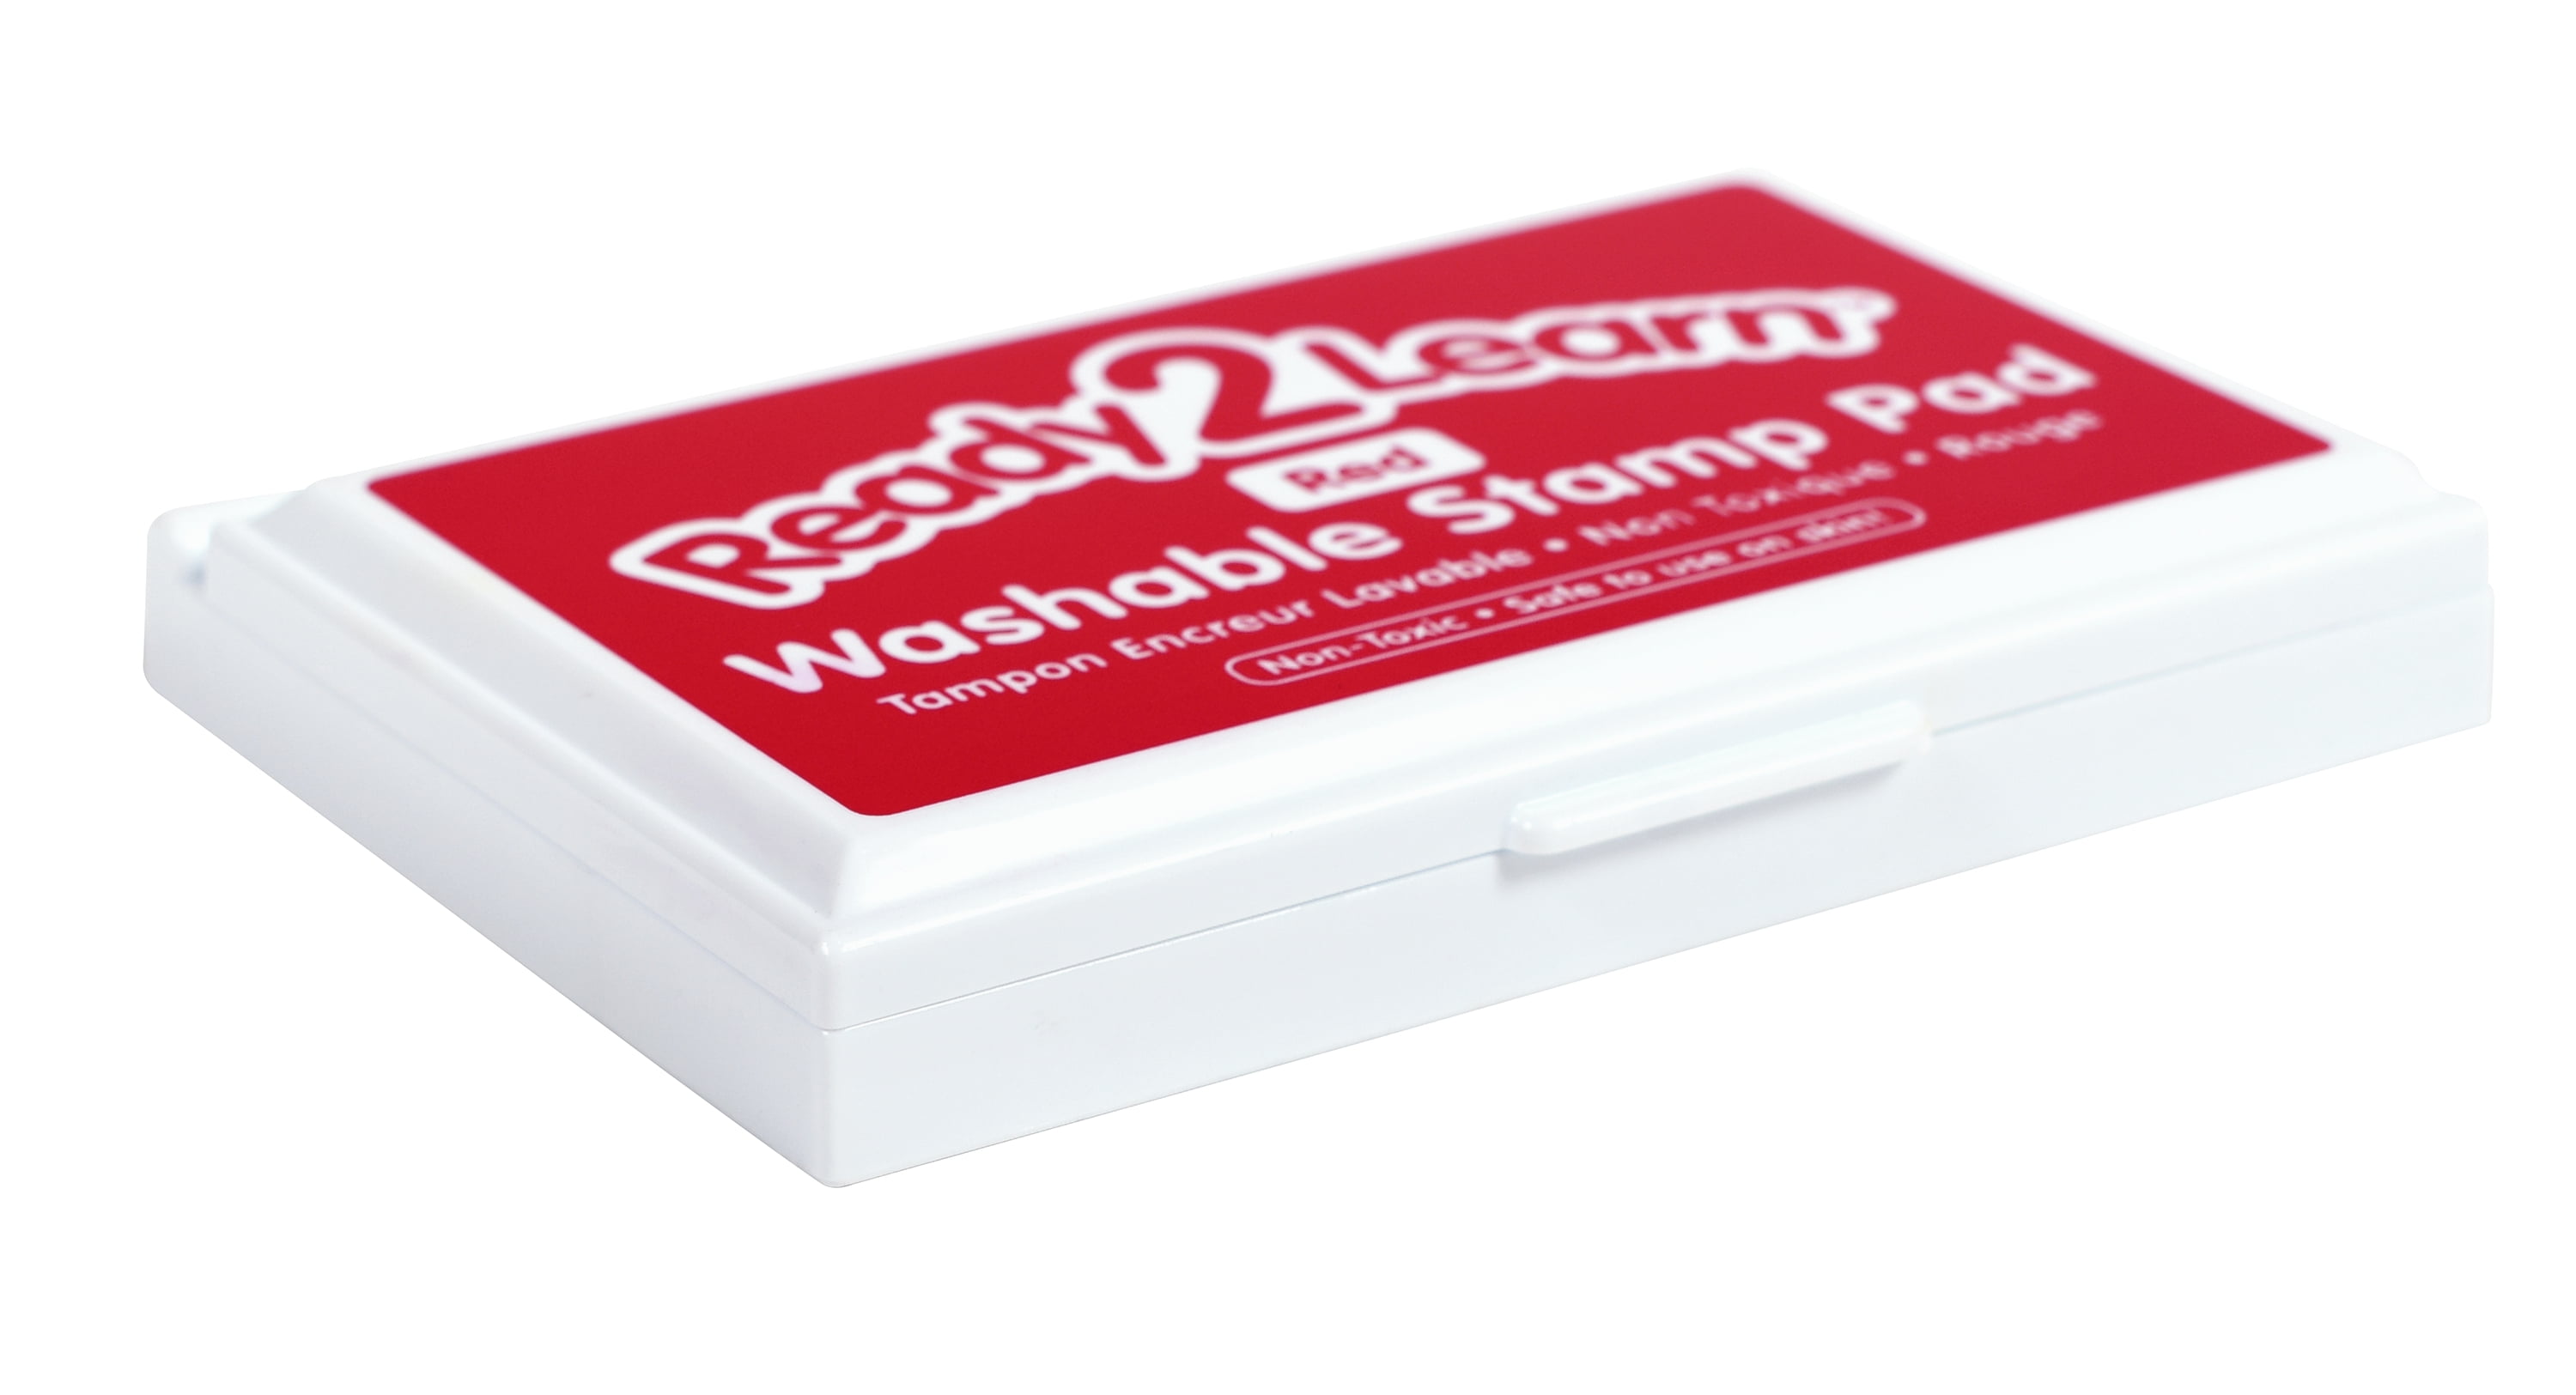 Craft Smart Washable Ink Pad: Red | 2 x 3 Inches